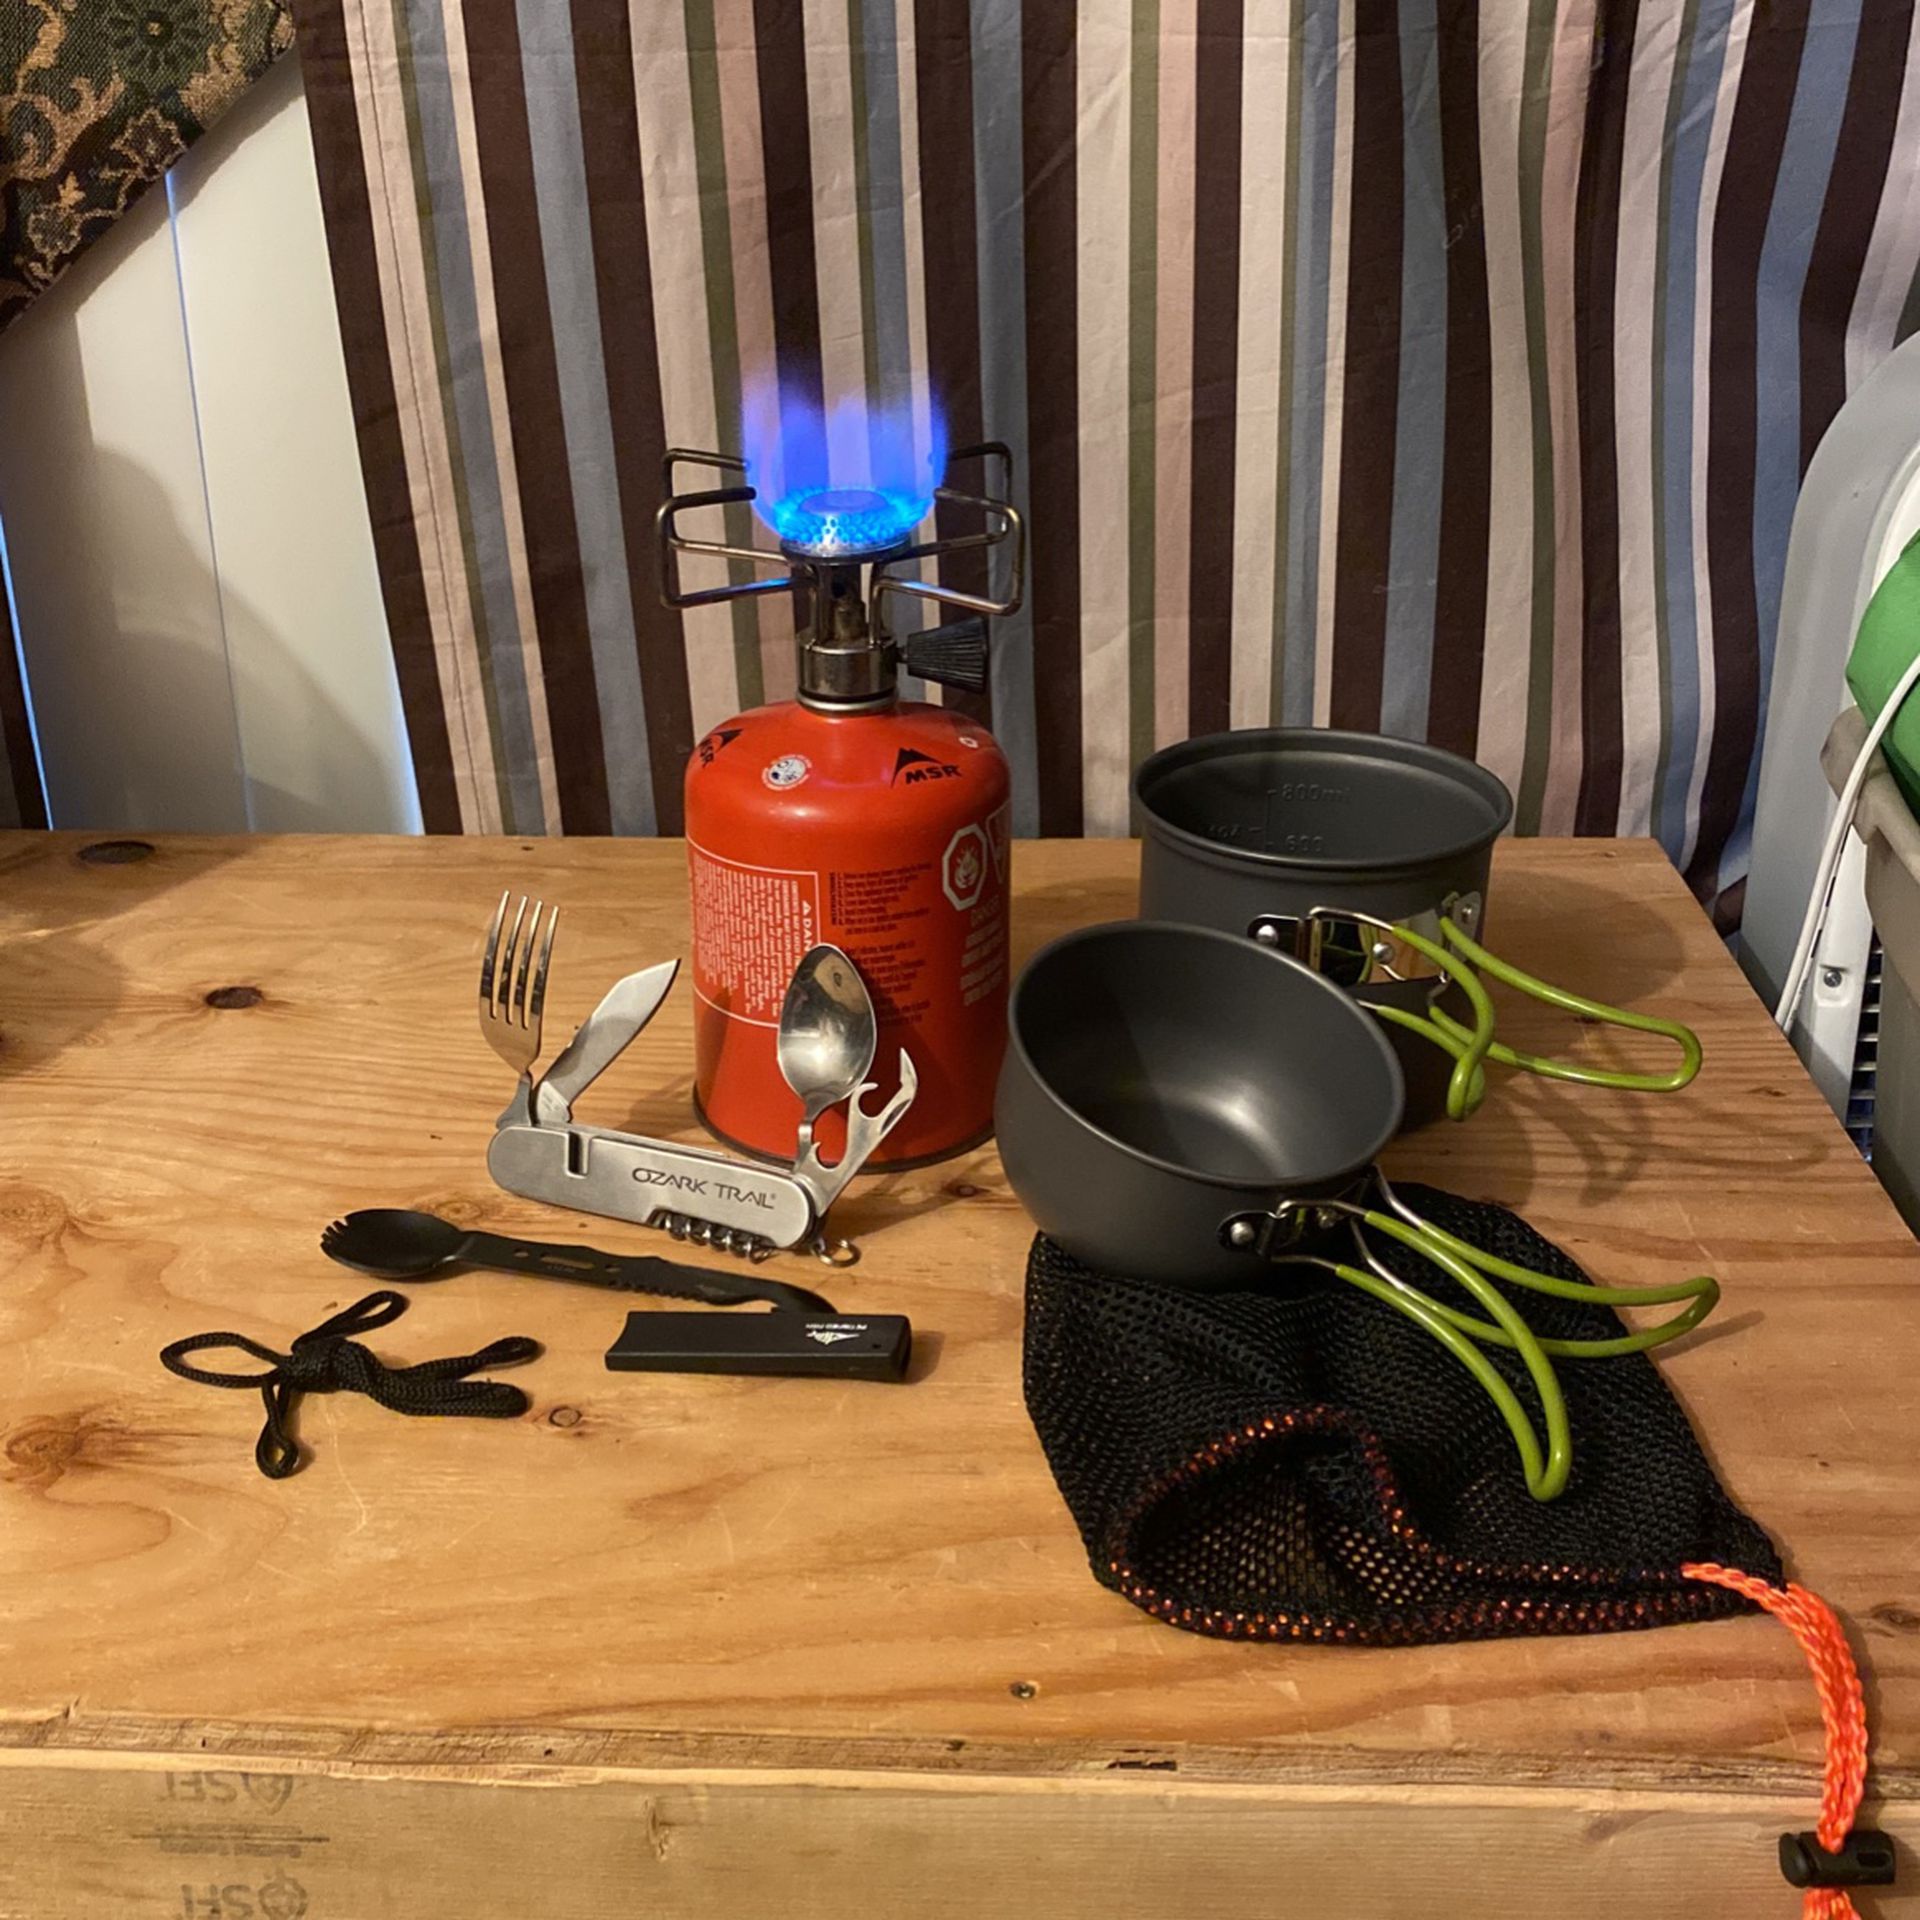 Backpacking stove,pots, fuel, forks, and spoons.